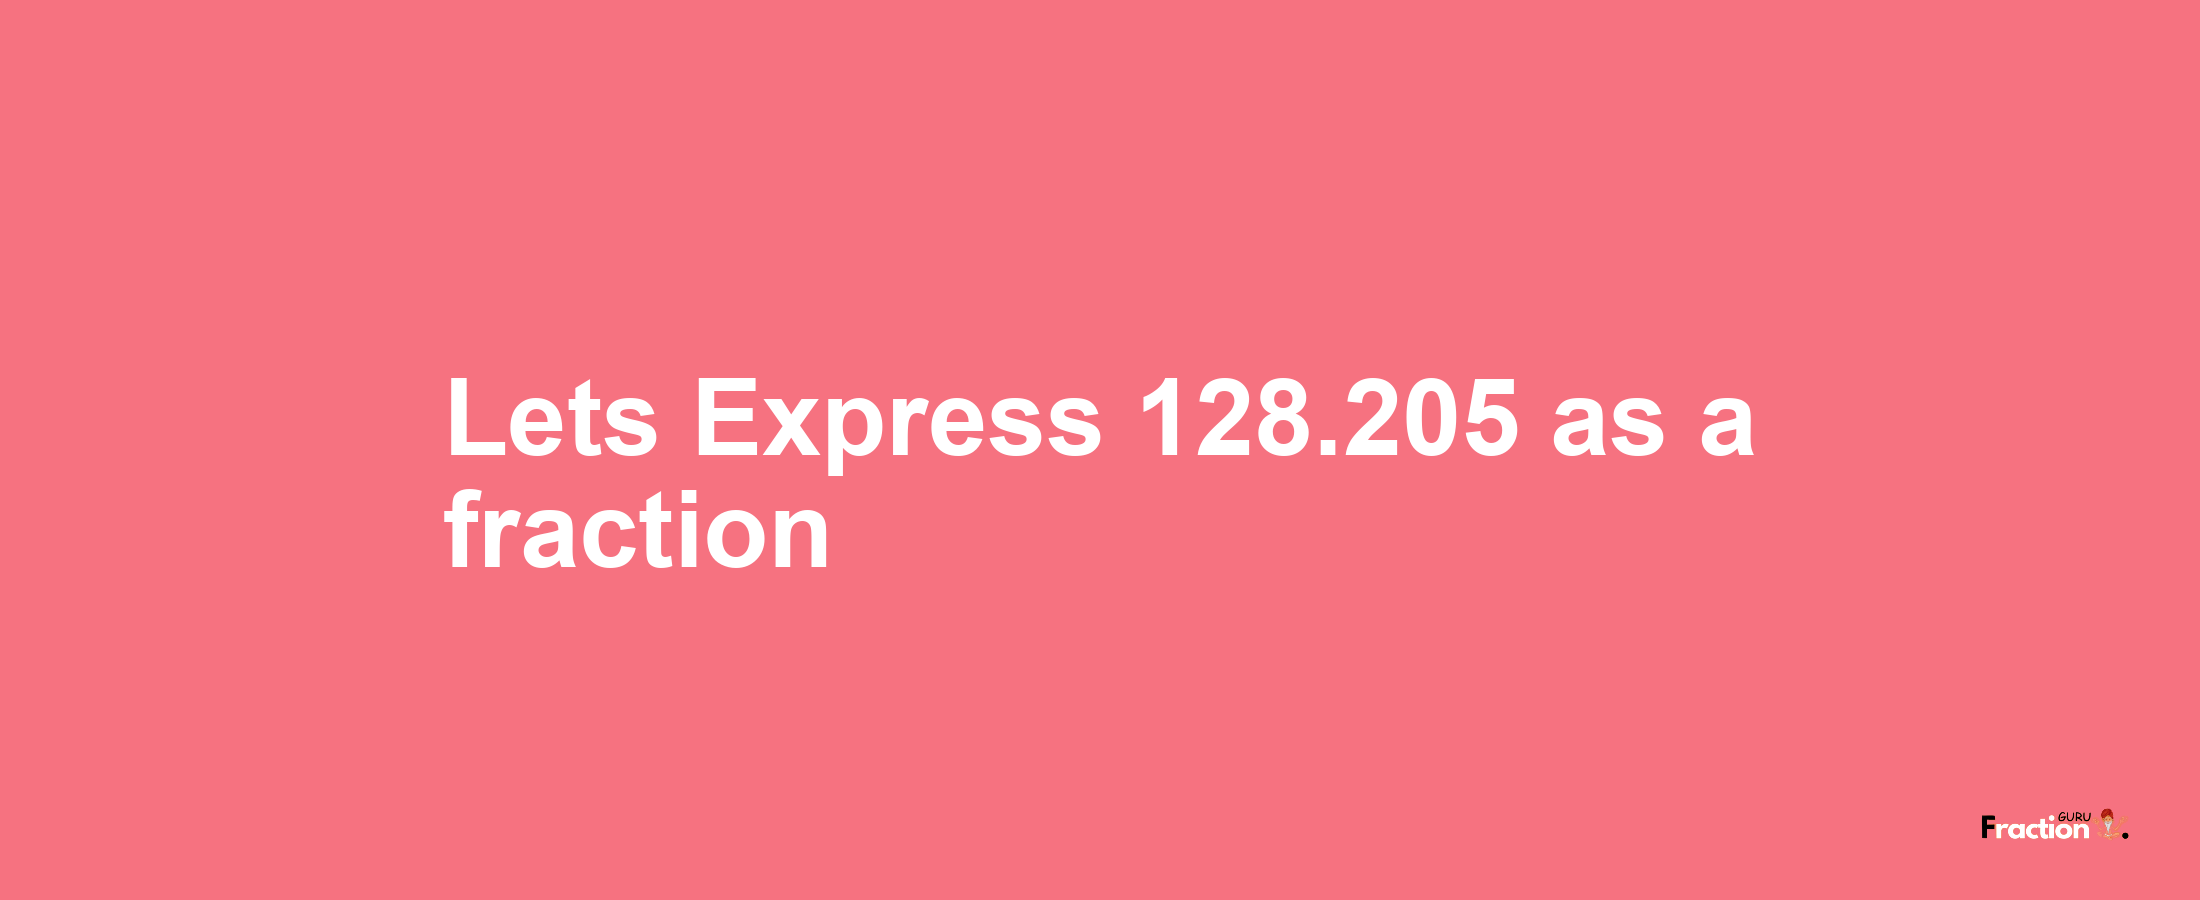 Lets Express 128.205 as afraction